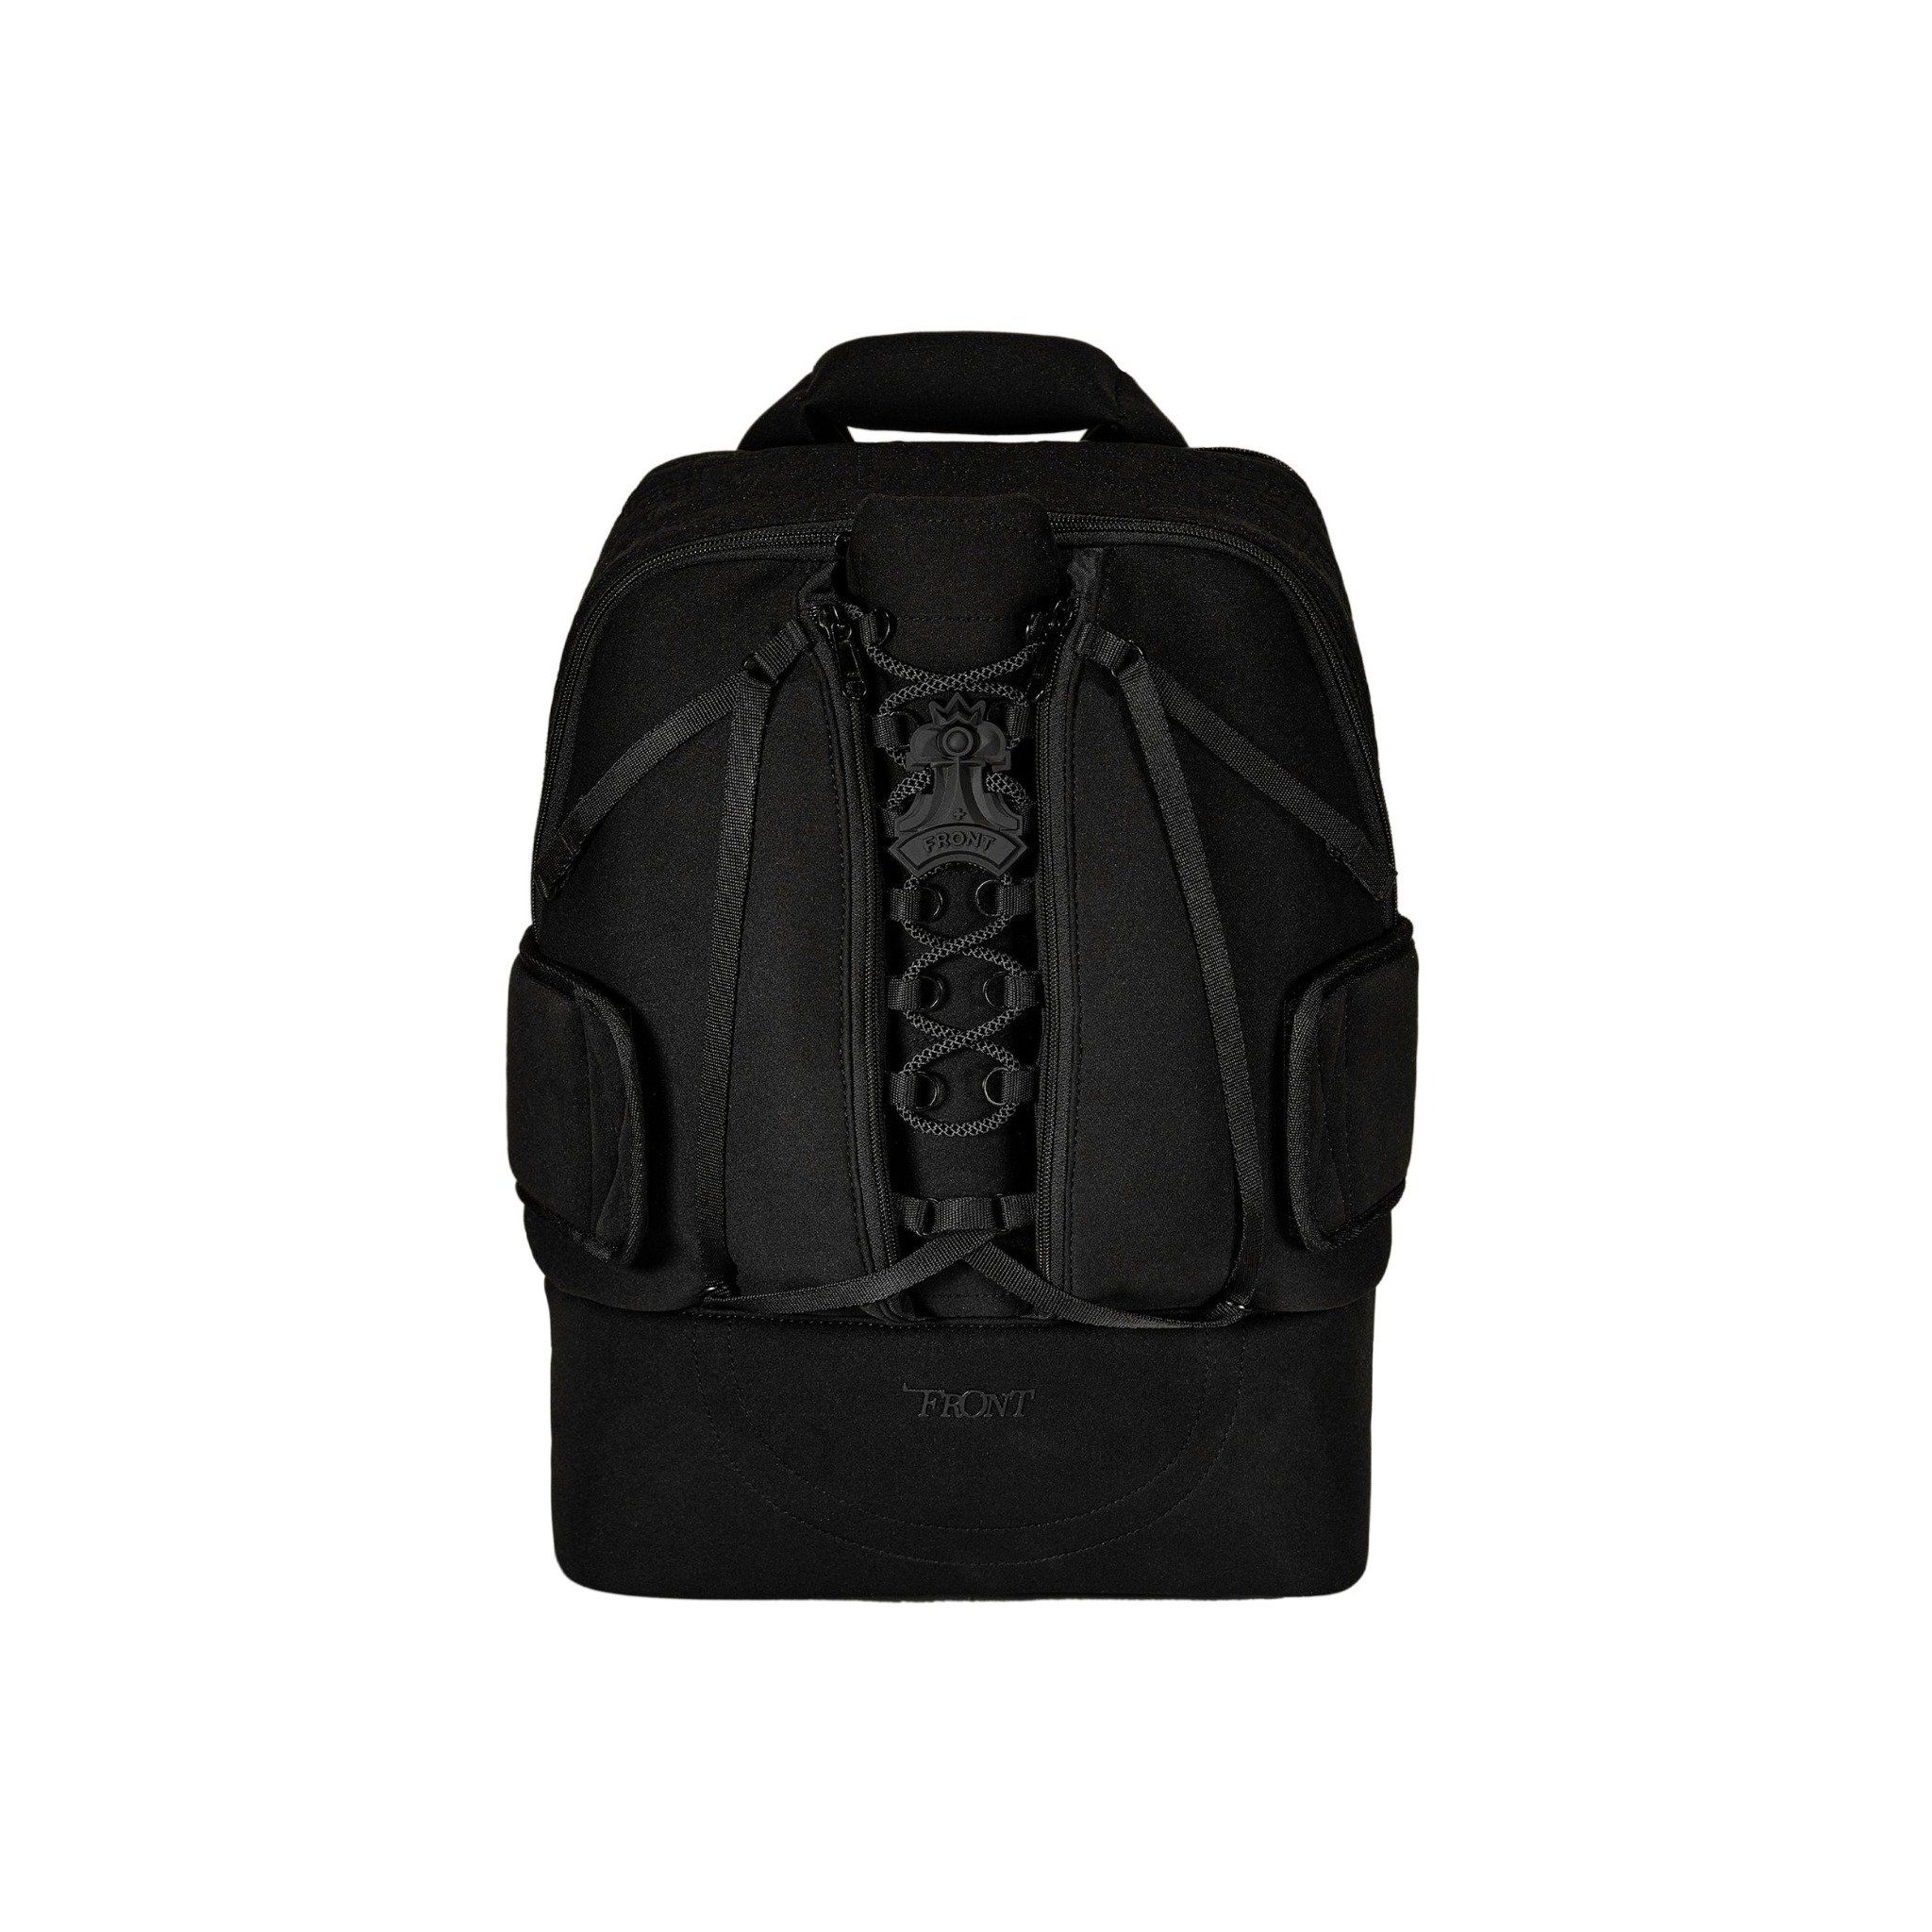  FRONT Queening The Pawn Backpack SB22 - BLACK - M 